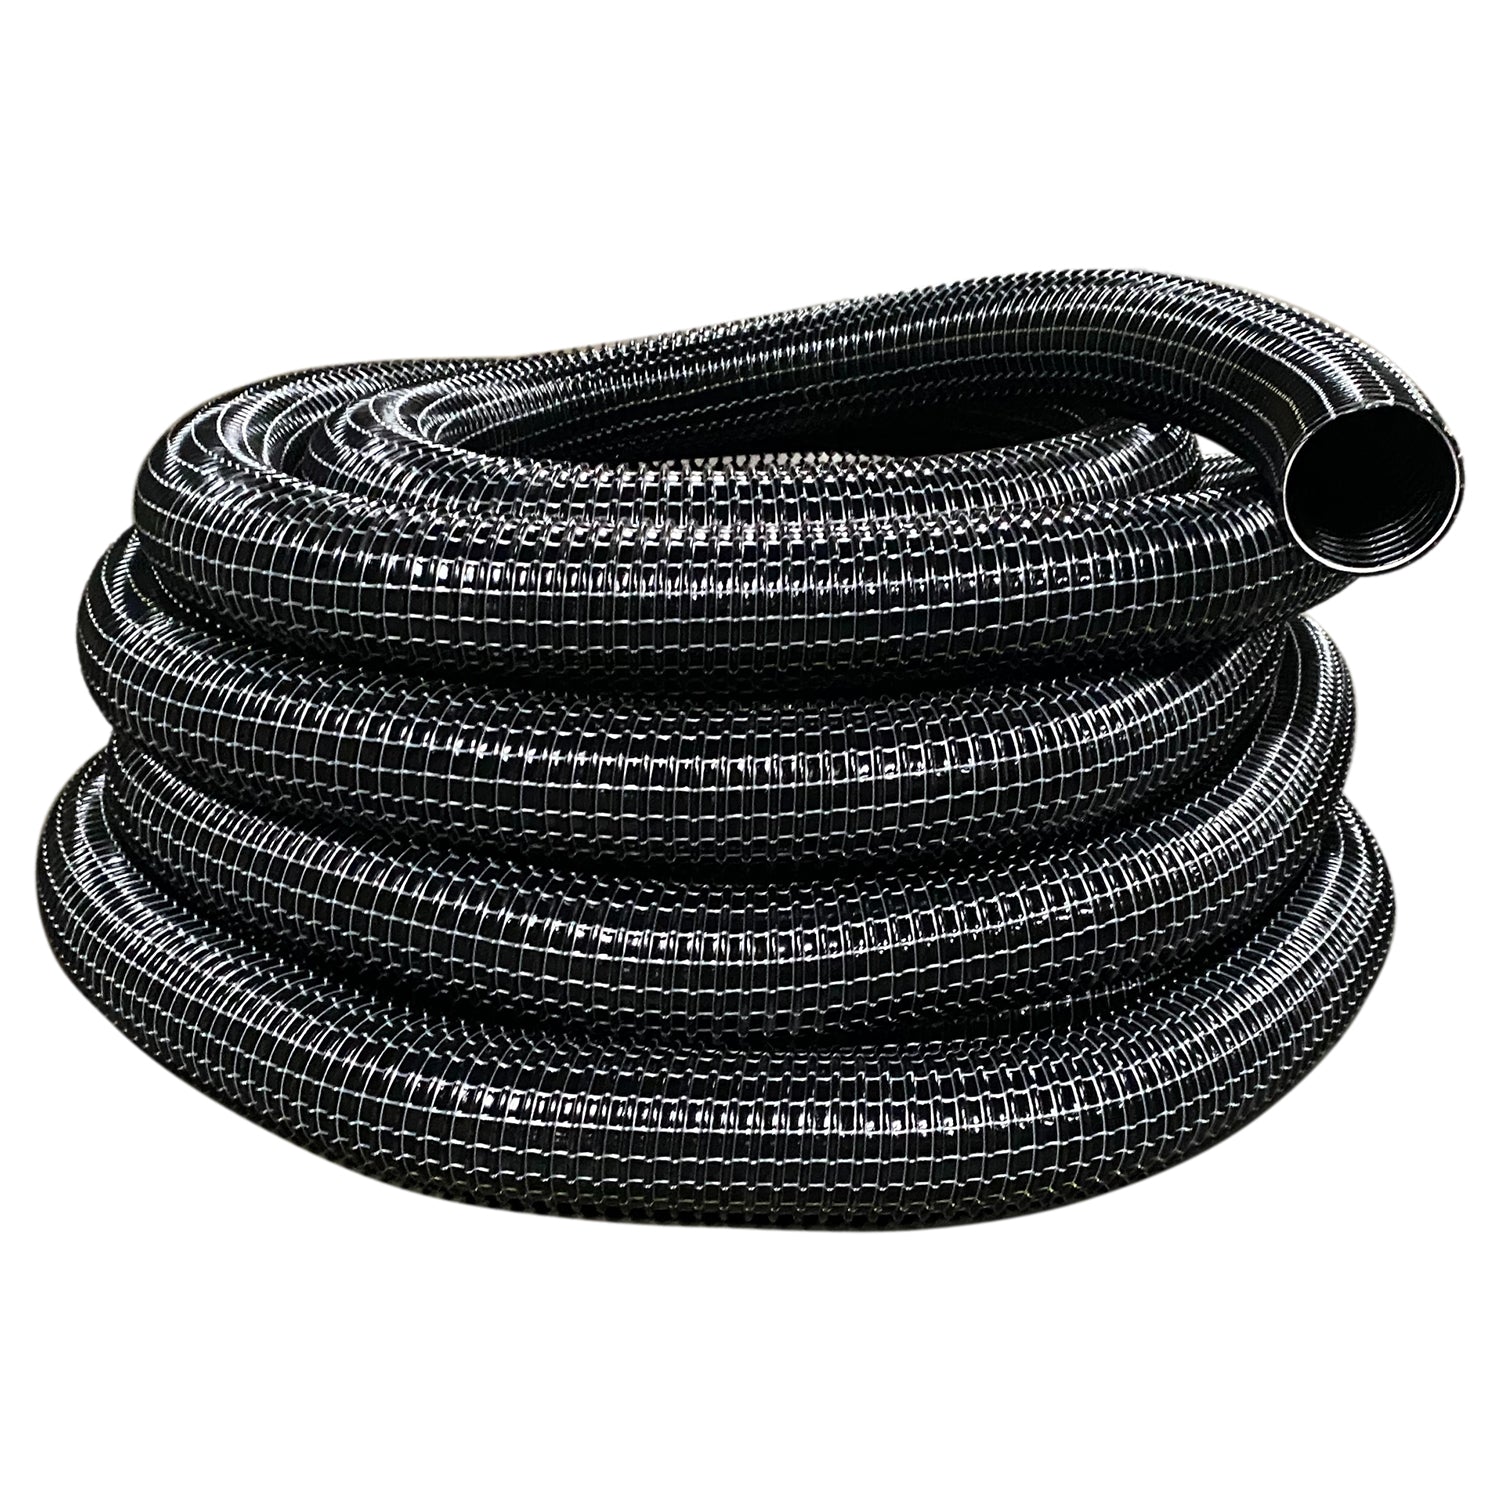 2" Vacuum Hose 50 foot long for Classic Cyclone Gutter Pro Vacs (side inlet) - Hose Only